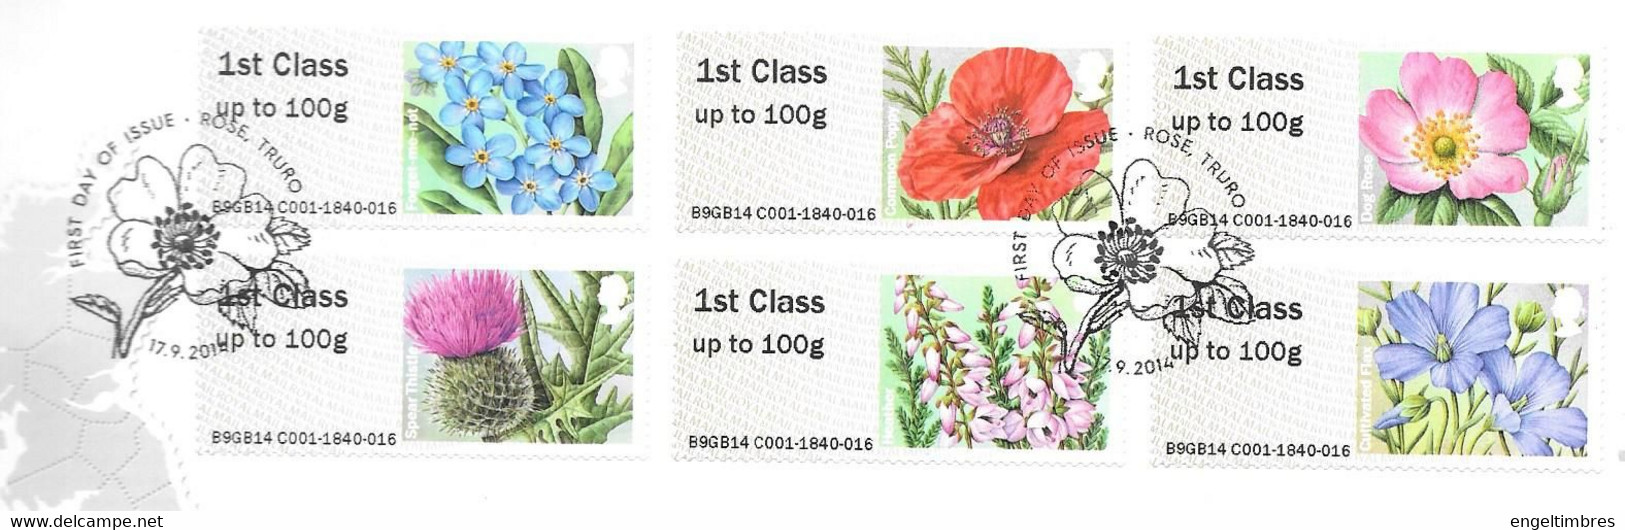 GB -  Post & GO Stamps (6)   2014  FLOWERS PART 2 -    FDC Or  USED  "ON PIECE" - SEE NOTES  And Scans - 2011-2020 Ediciones Decimales